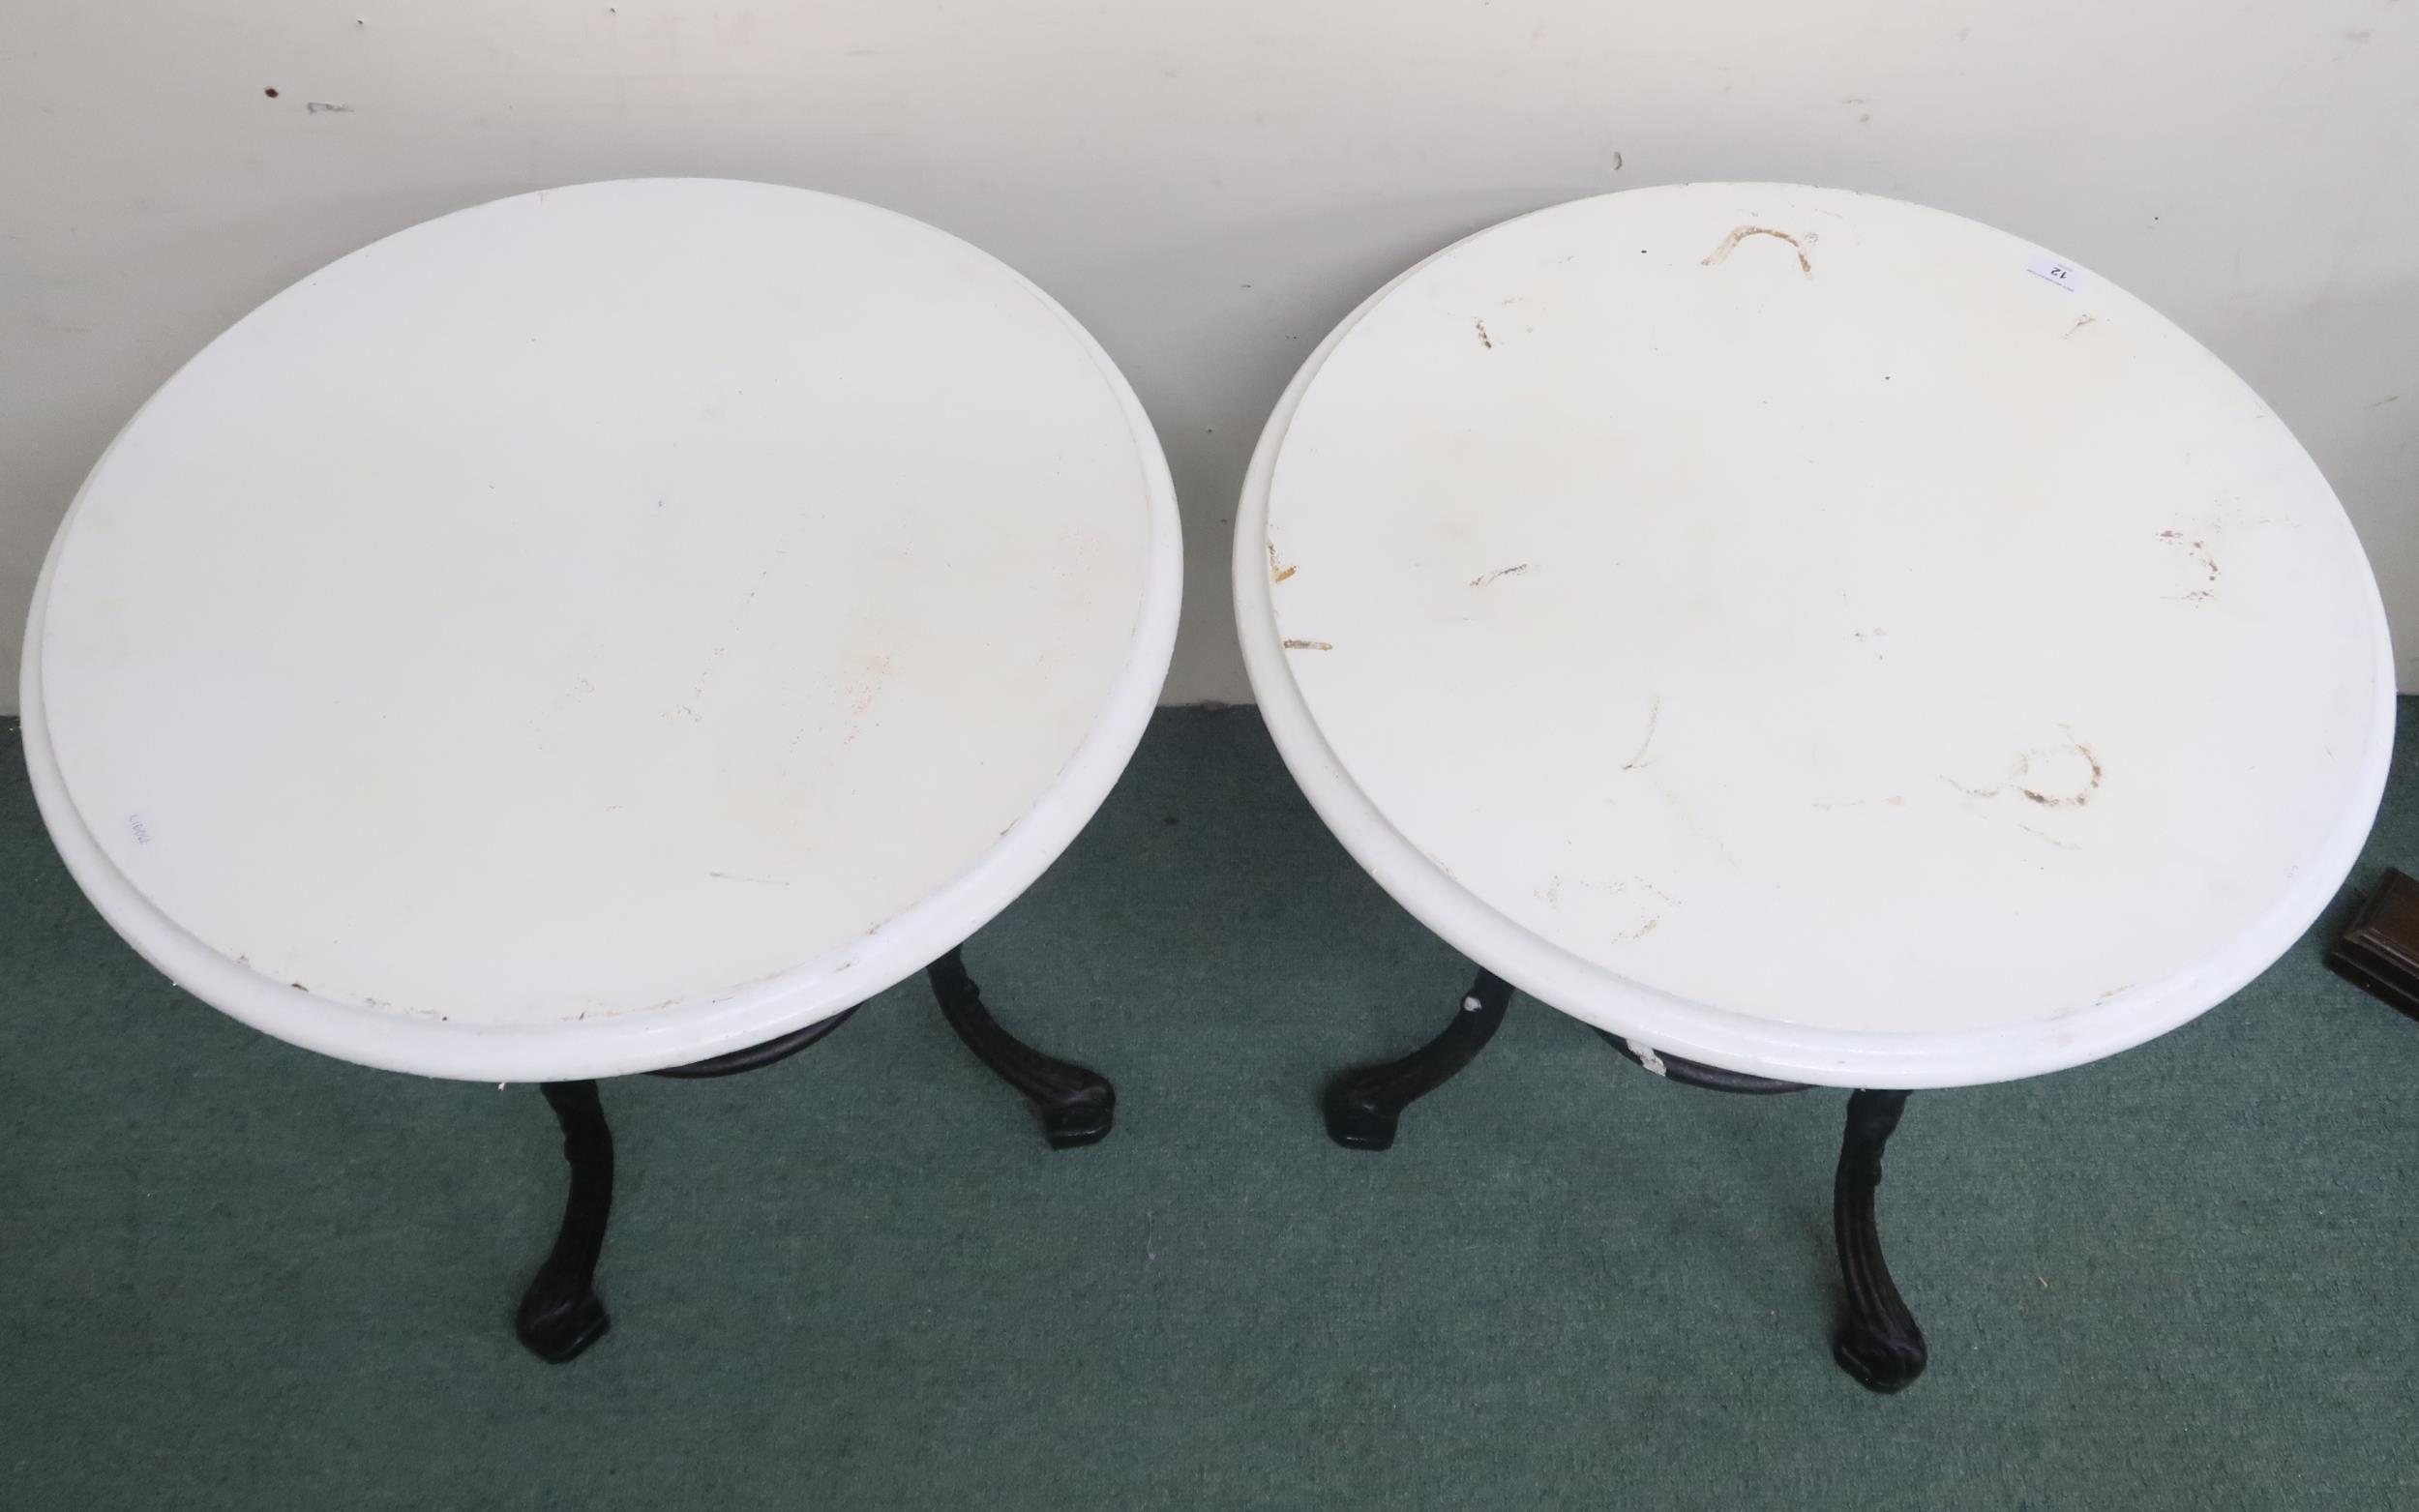 A pair of late 19th/ early 20th century pub/bar tables with painted circular tops on cast iron bases - Image 3 of 3